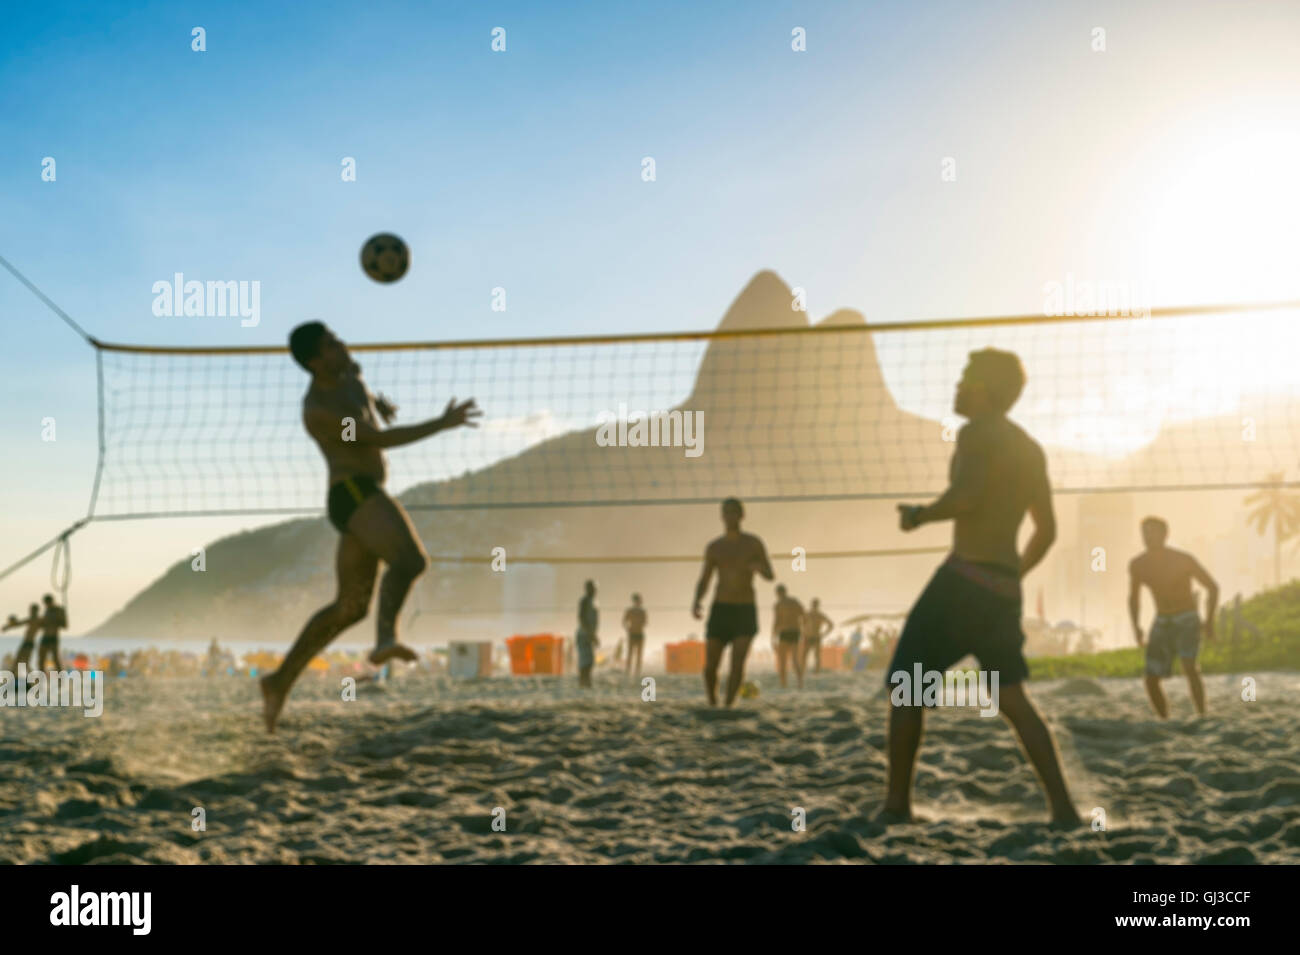 Defocused scene of silhouettes of carioca Brazilians playing futevolei (footvolley) against a sunset backdrop of Ipanema Beach Stock Photo